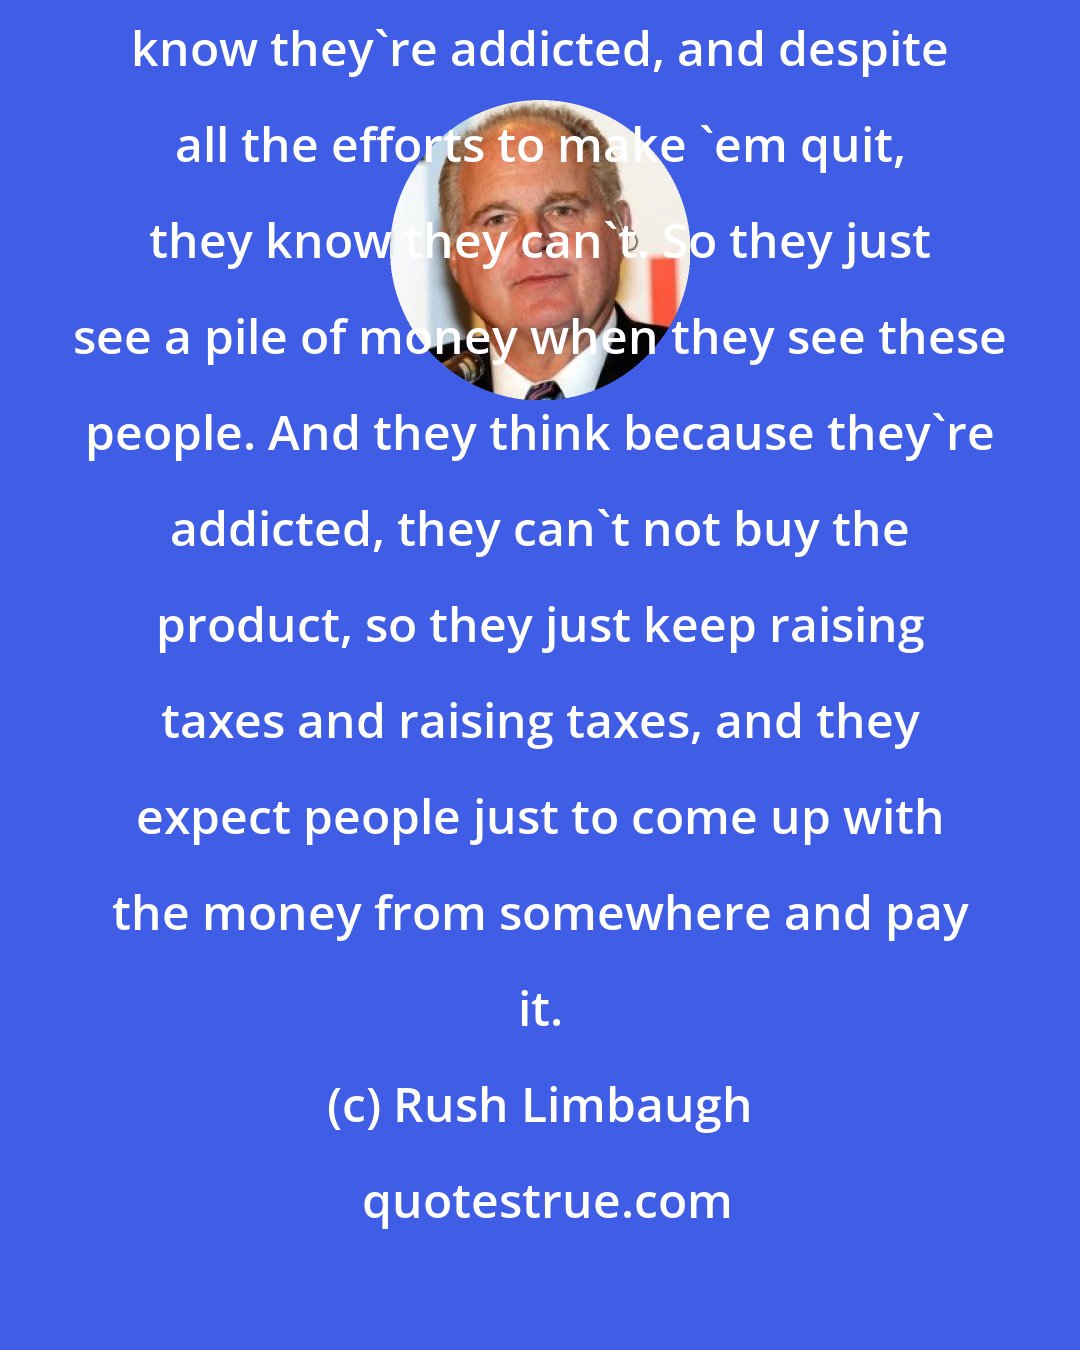 Rush Limbaugh: The state of New York's got this group of people called smokers, and they know they're addicted, and despite all the efforts to make 'em quit, they know they can't. So they just see a pile of money when they see these people. And they think because they're addicted, they can't not buy the product, so they just keep raising taxes and raising taxes, and they expect people just to come up with the money from somewhere and pay it.